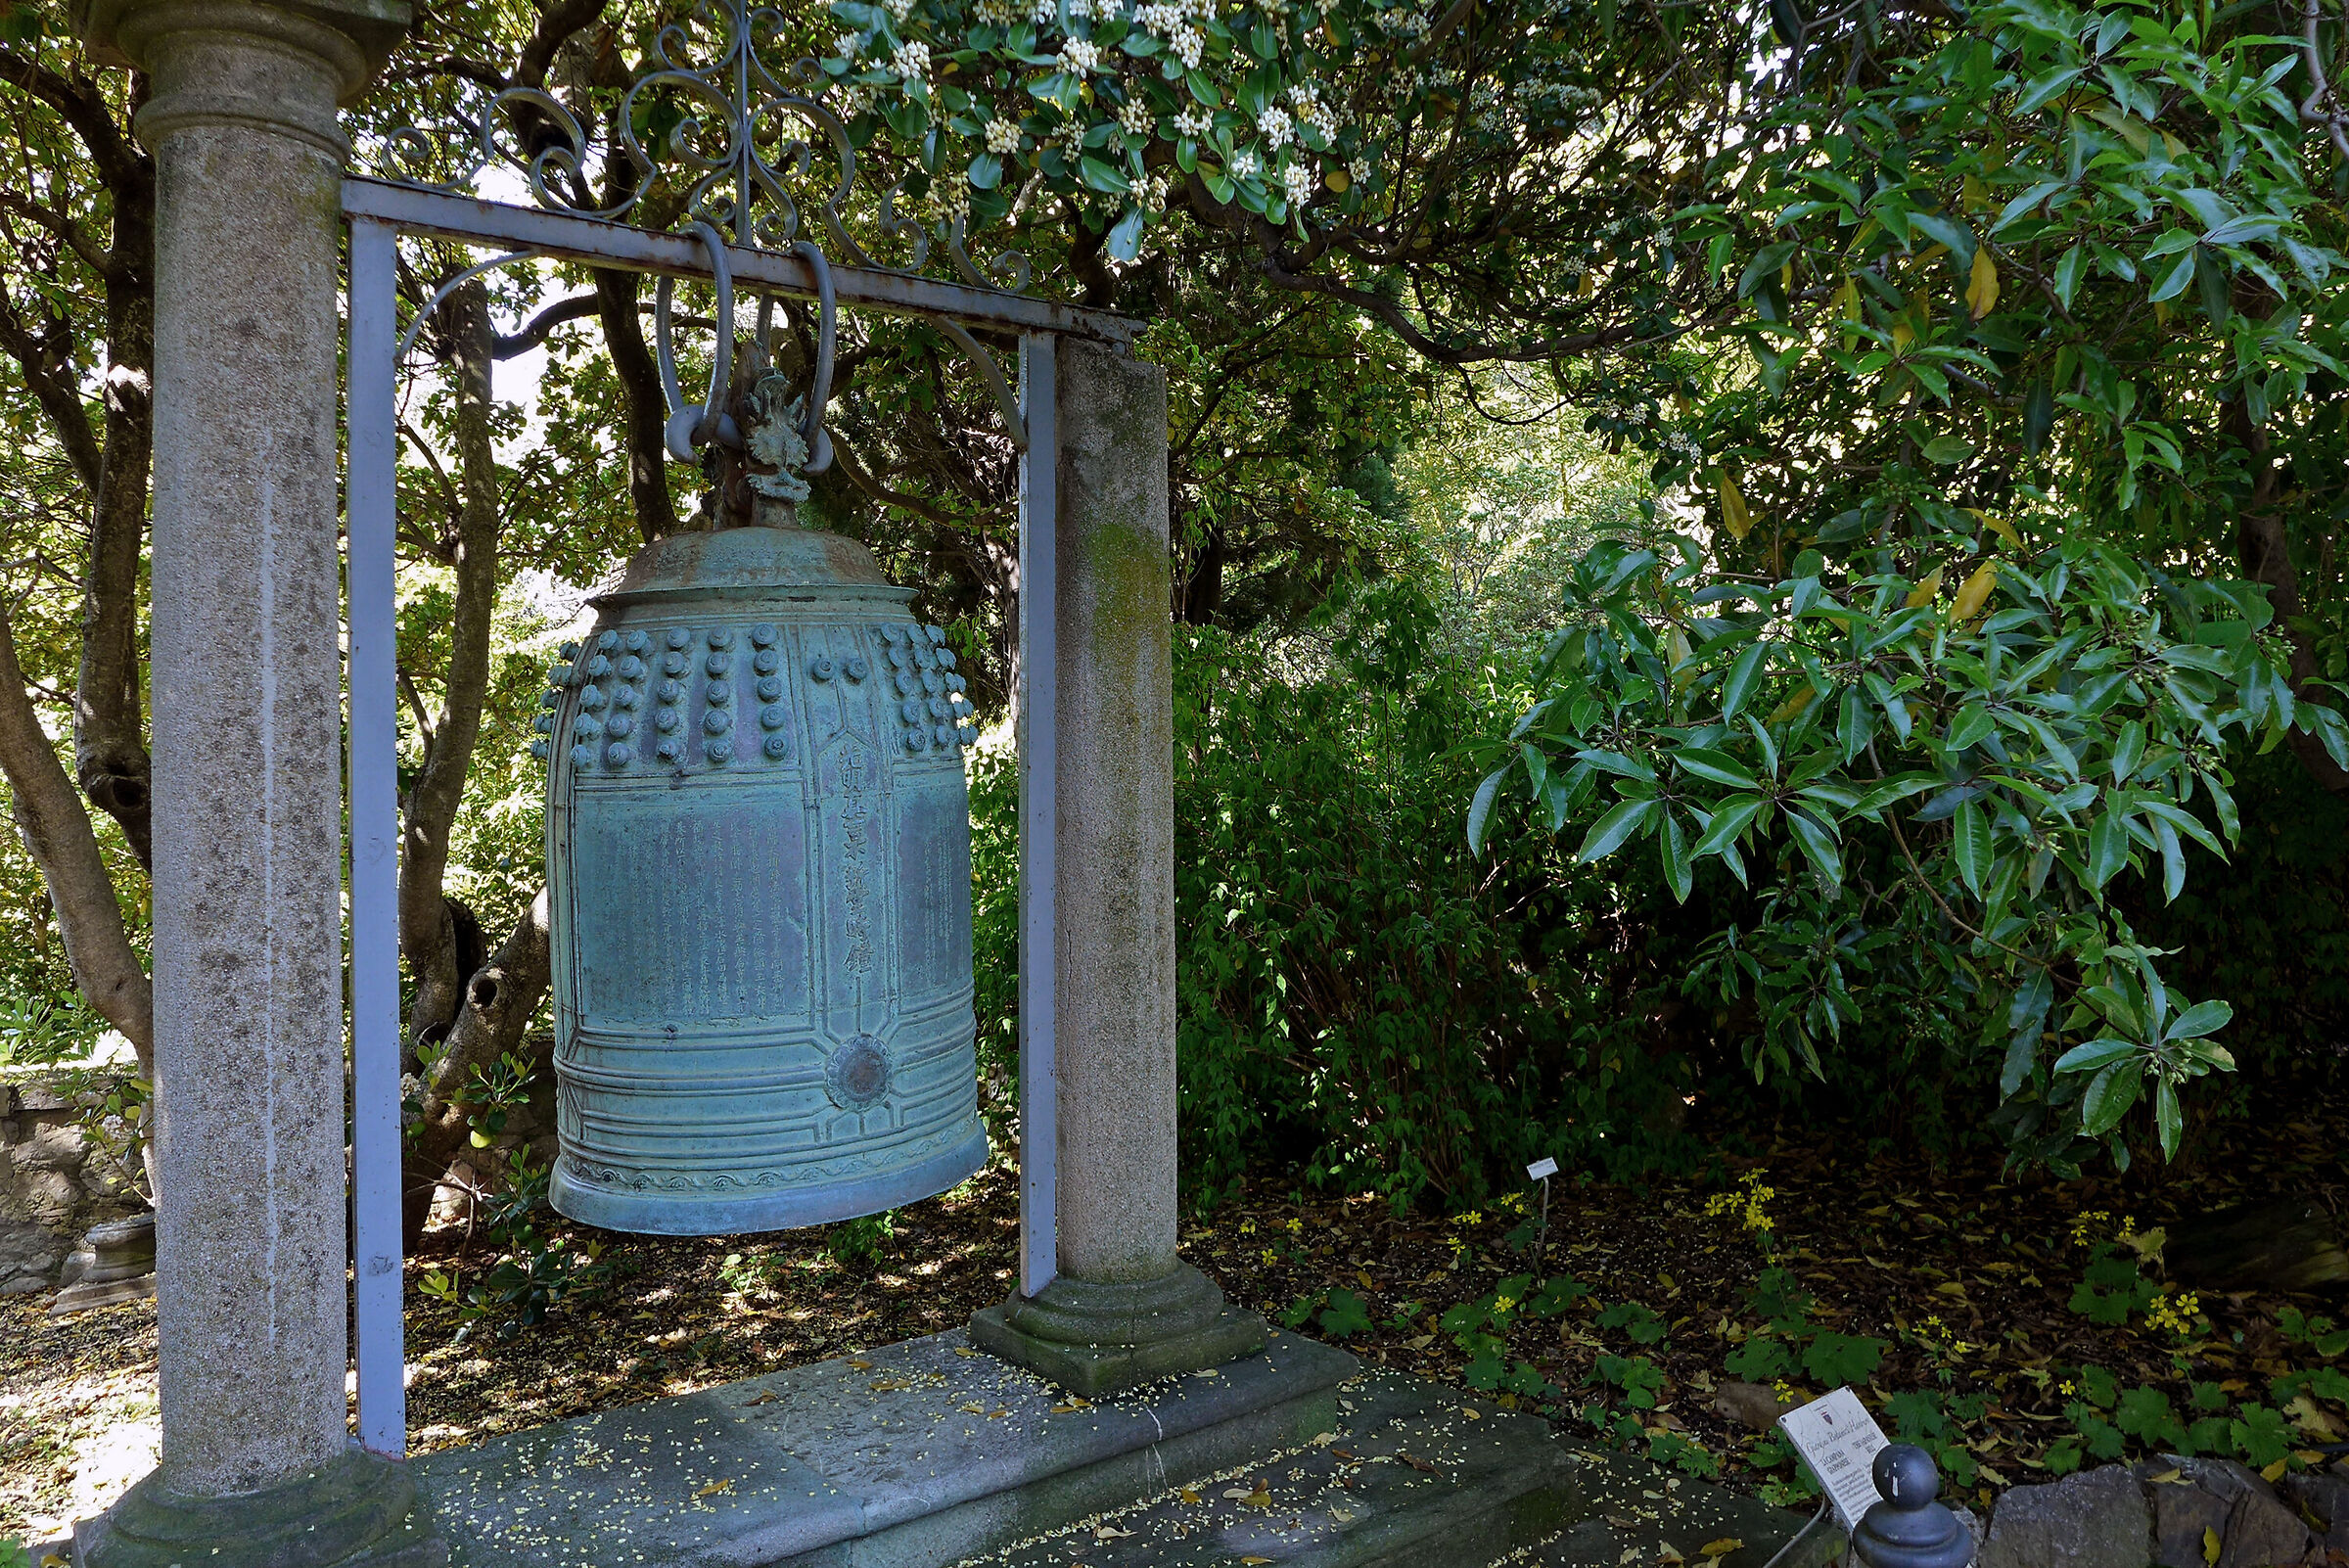 The Japanese Bell...